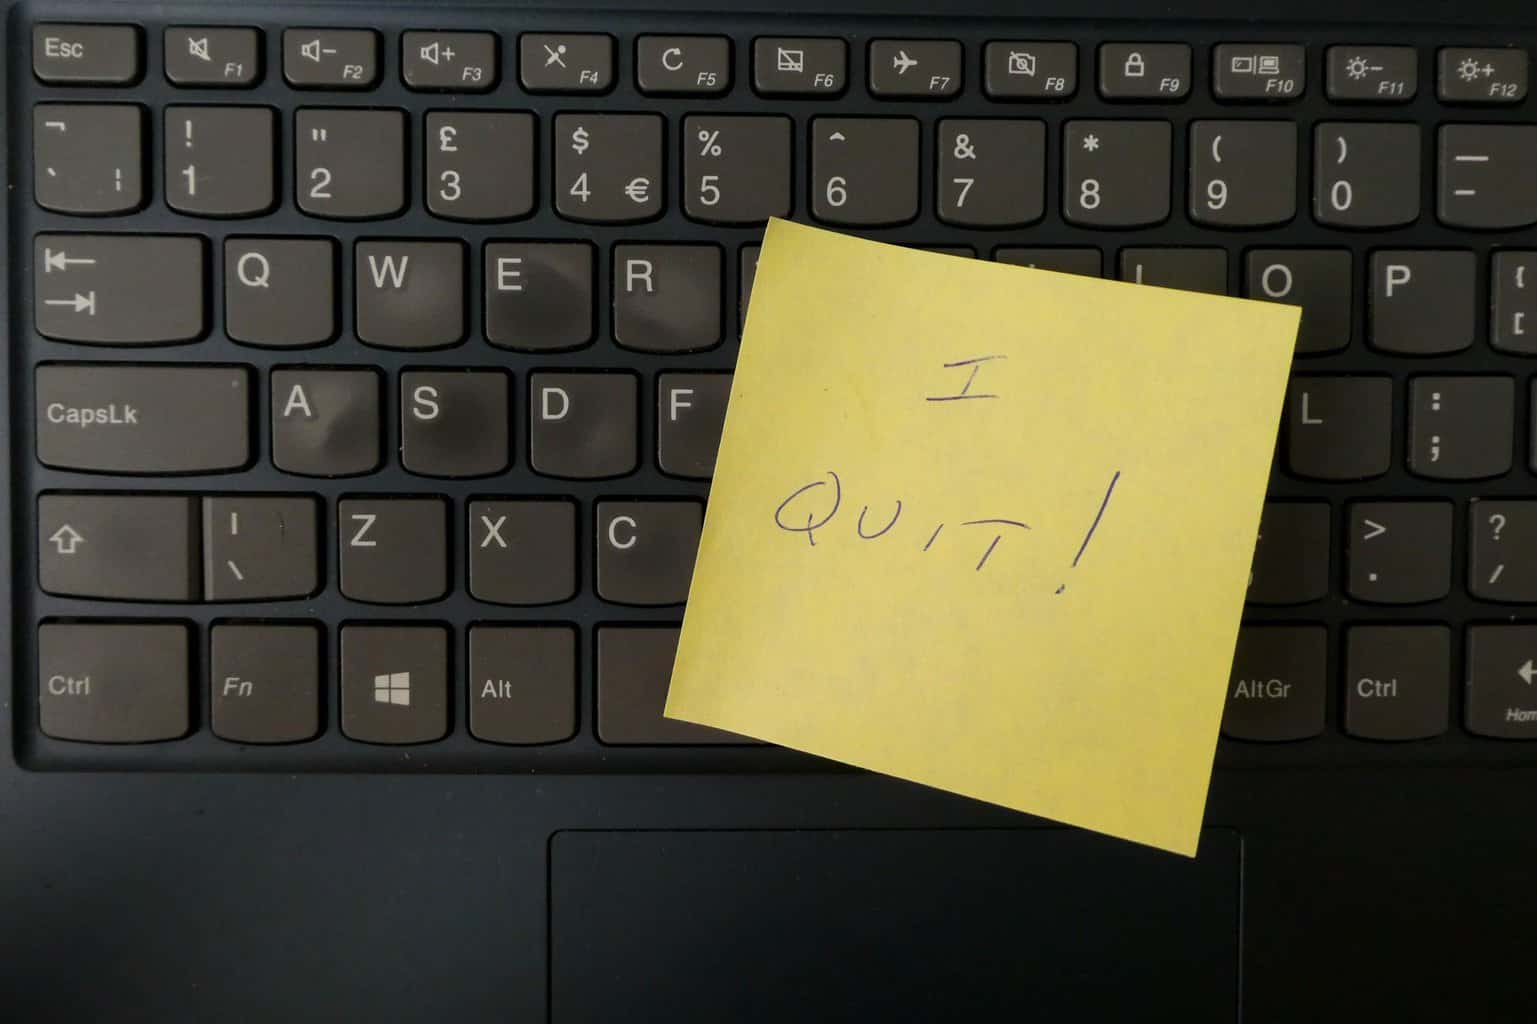 I quit written on a post it note, stuck to a keyboard.